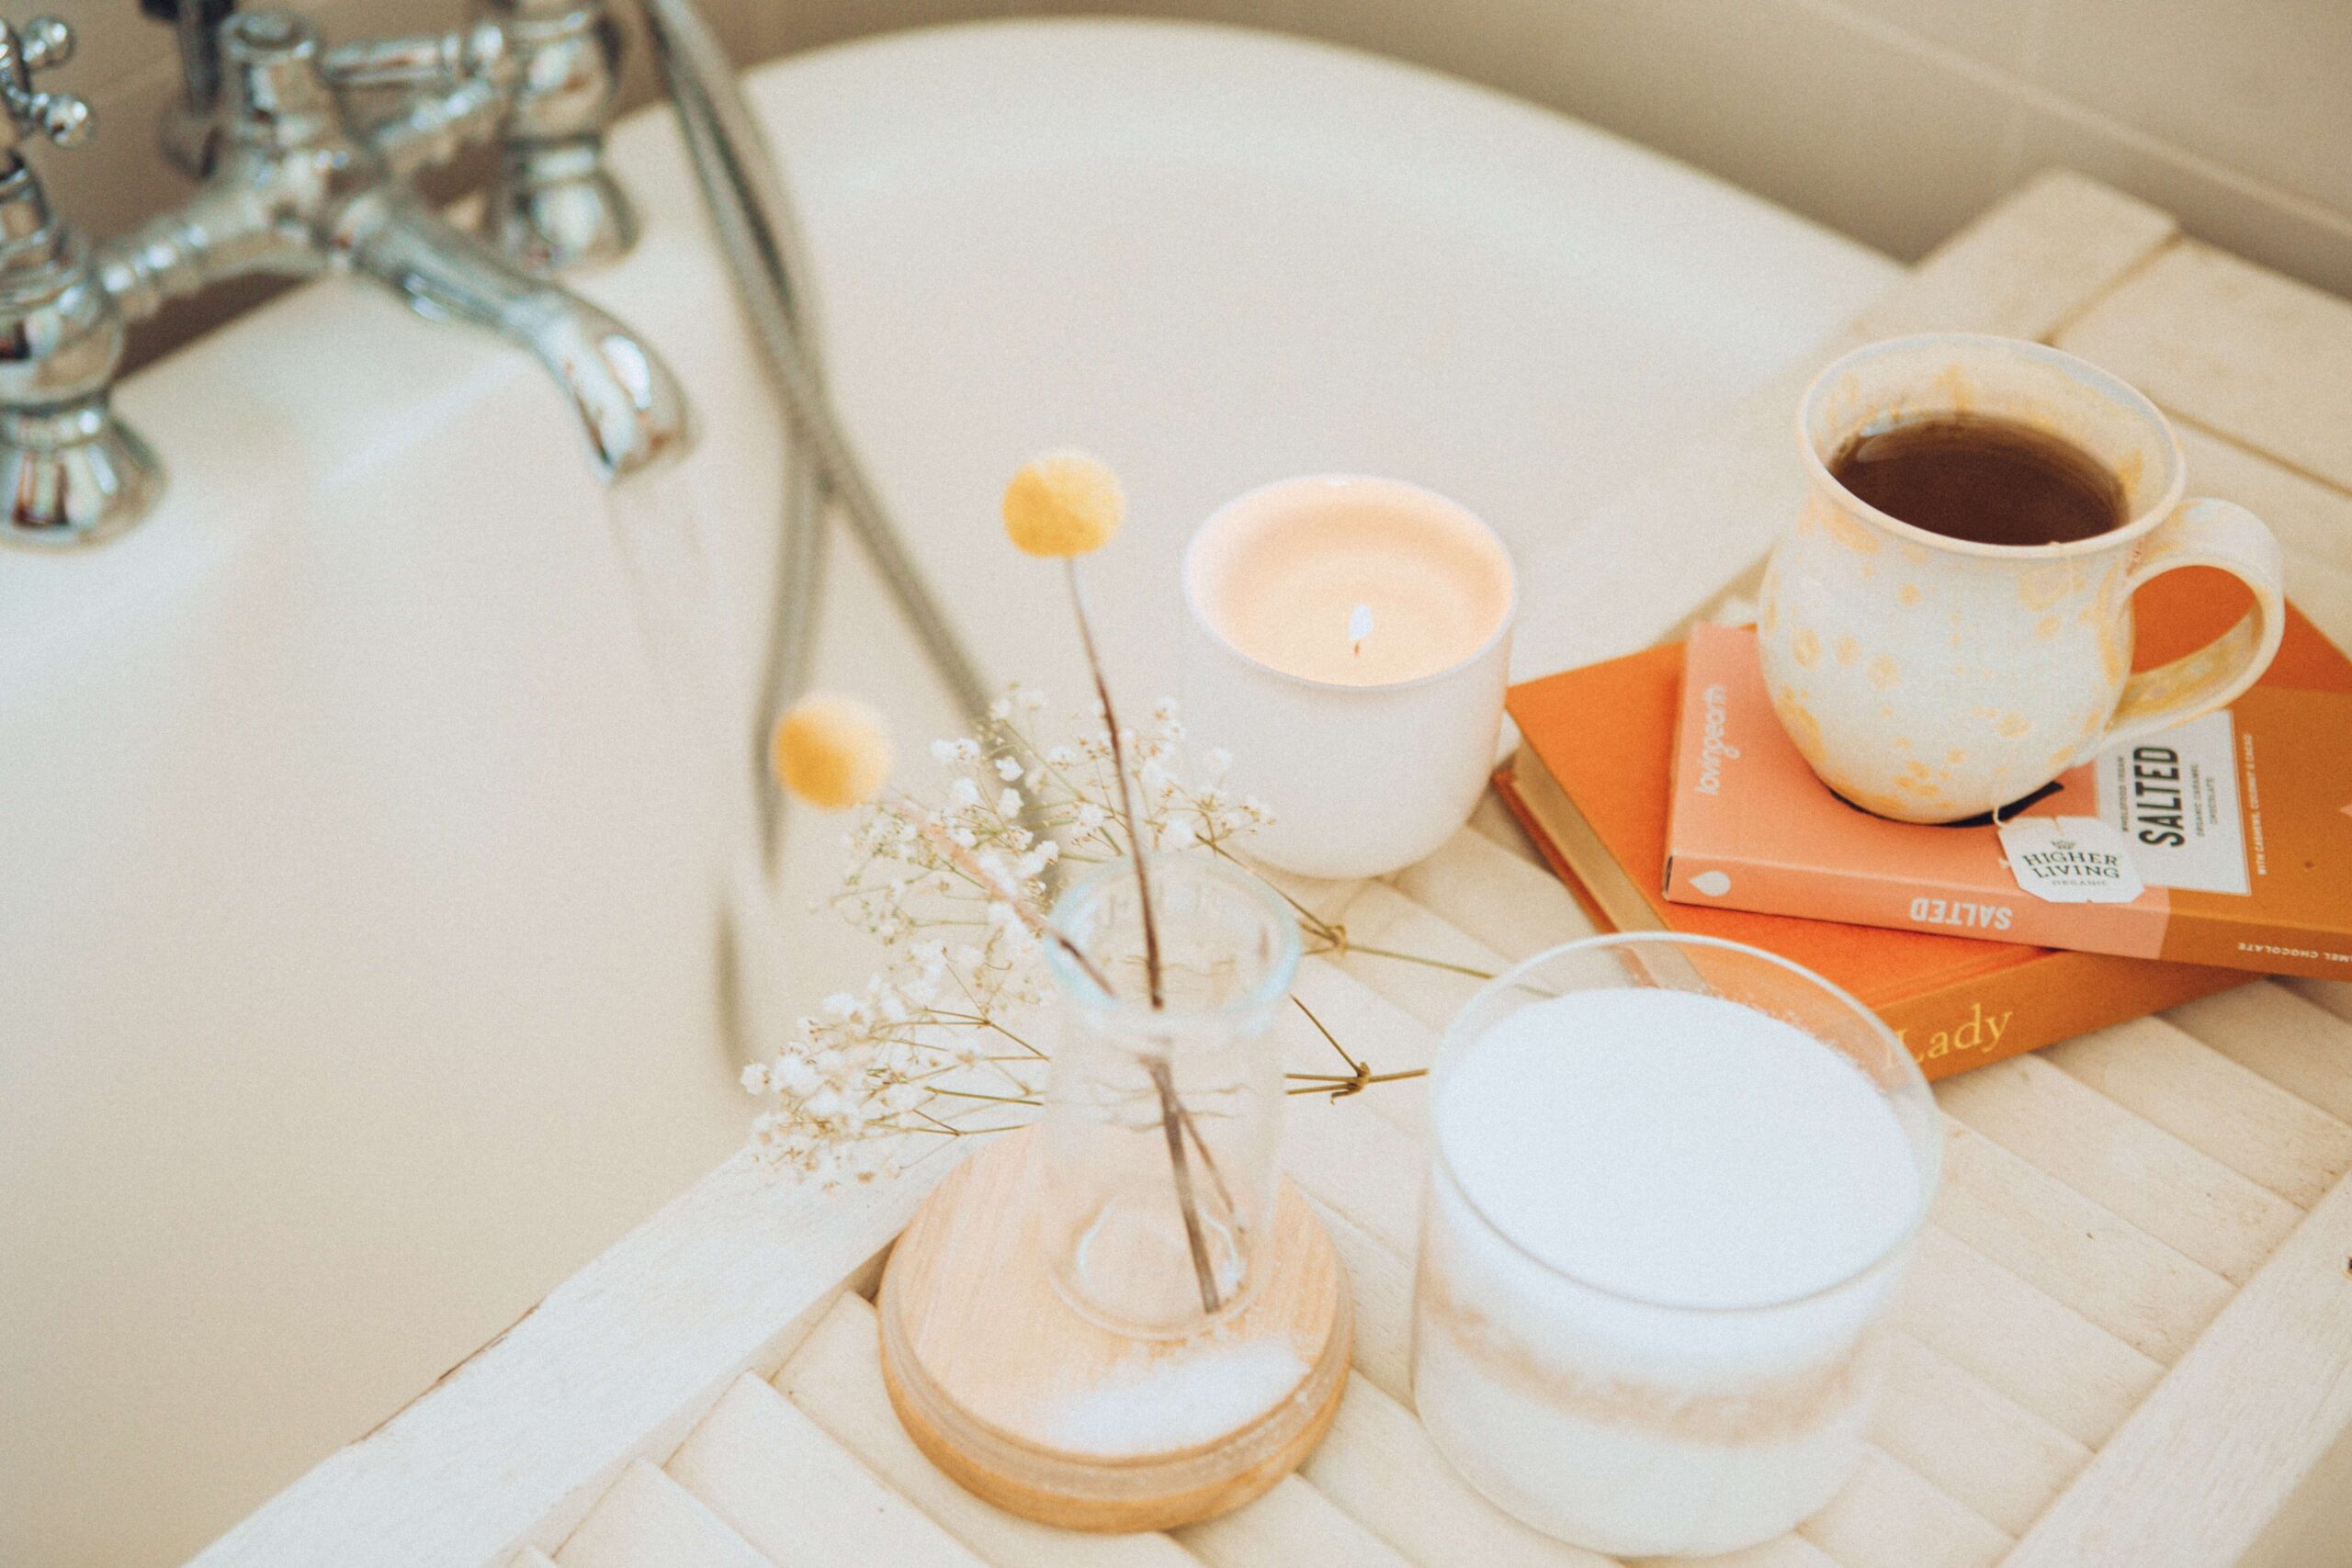 a close up shot of a bath being prepared for a night of self-care. on the table across the bathtub there is a ceramic mug of tea, a candle, an epsom salt container, and a little vase of picked wildflowers.